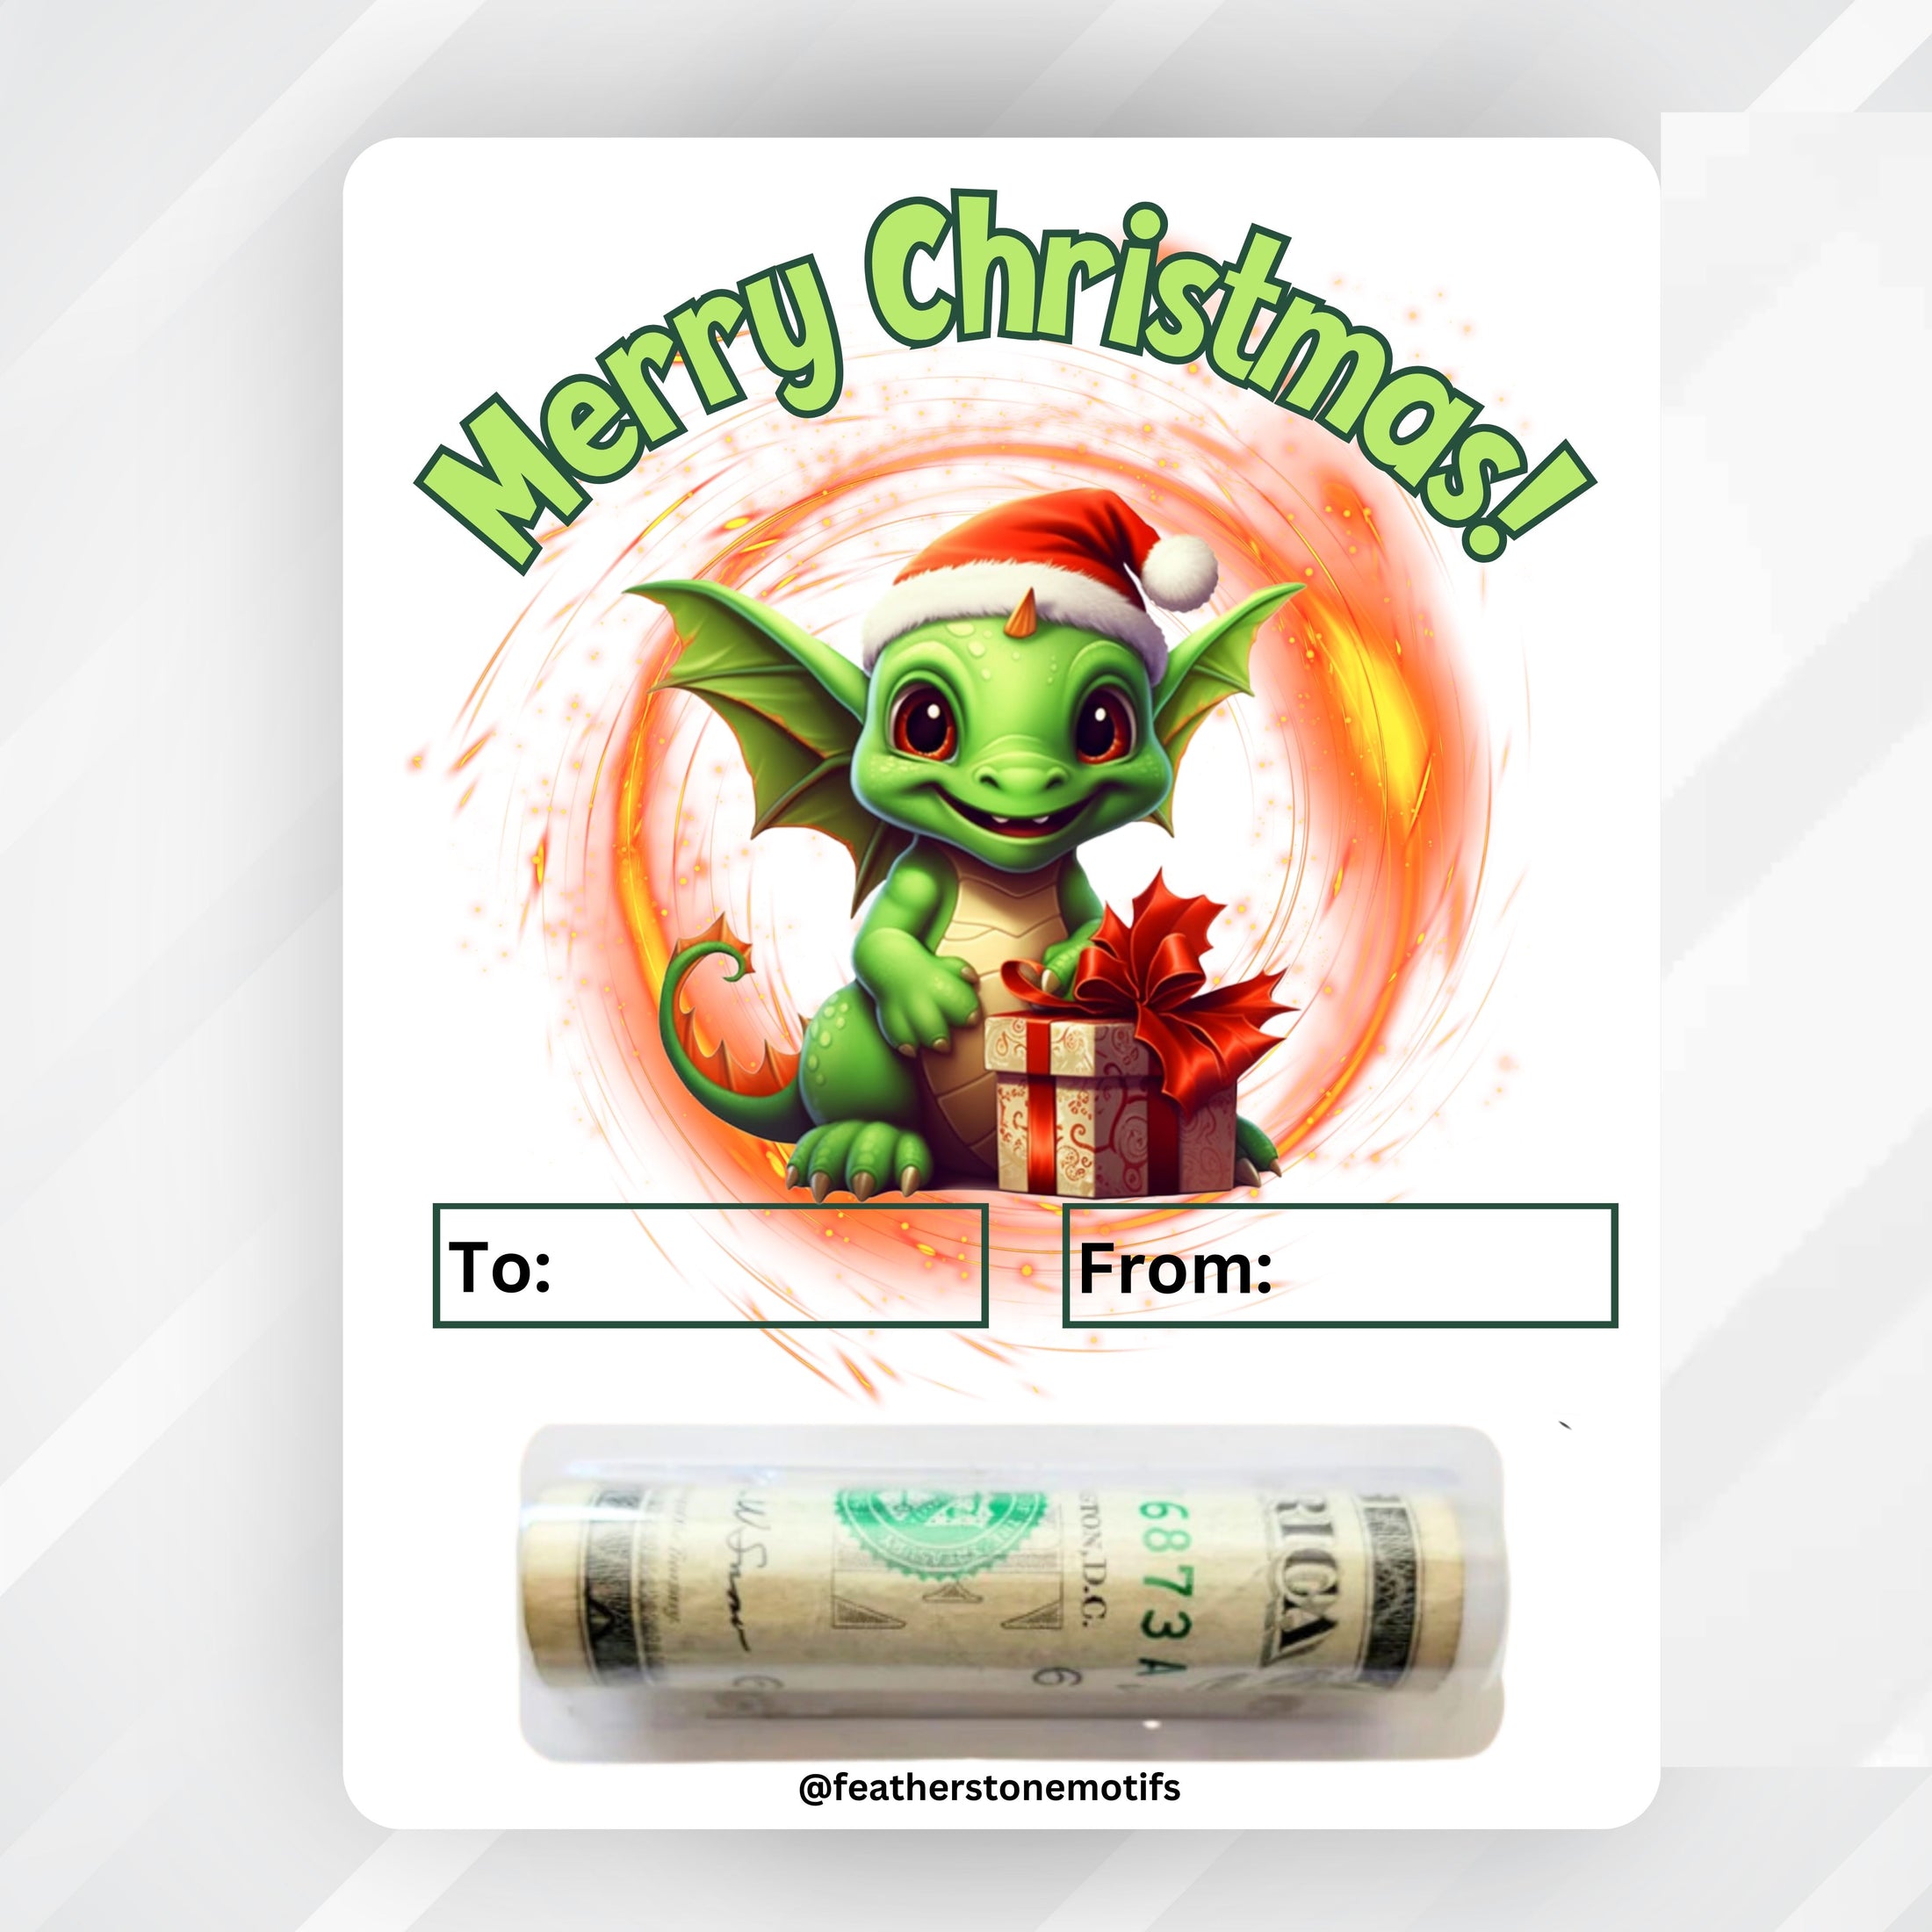 This image shows the money tube attached to the Dragon money card.